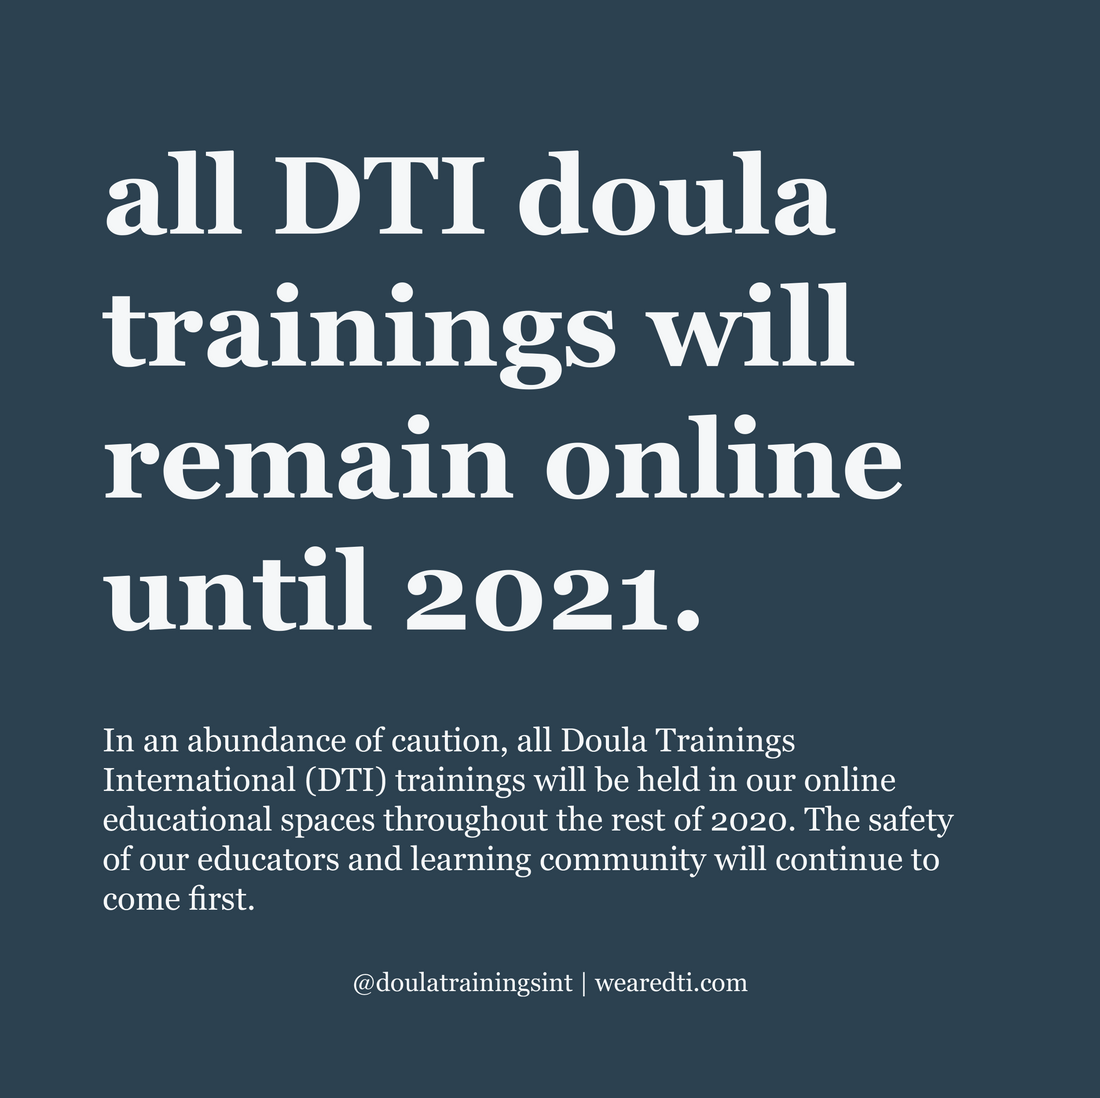 We’re Online Until 2021: Doula Trainings International’s Response to COVID-19